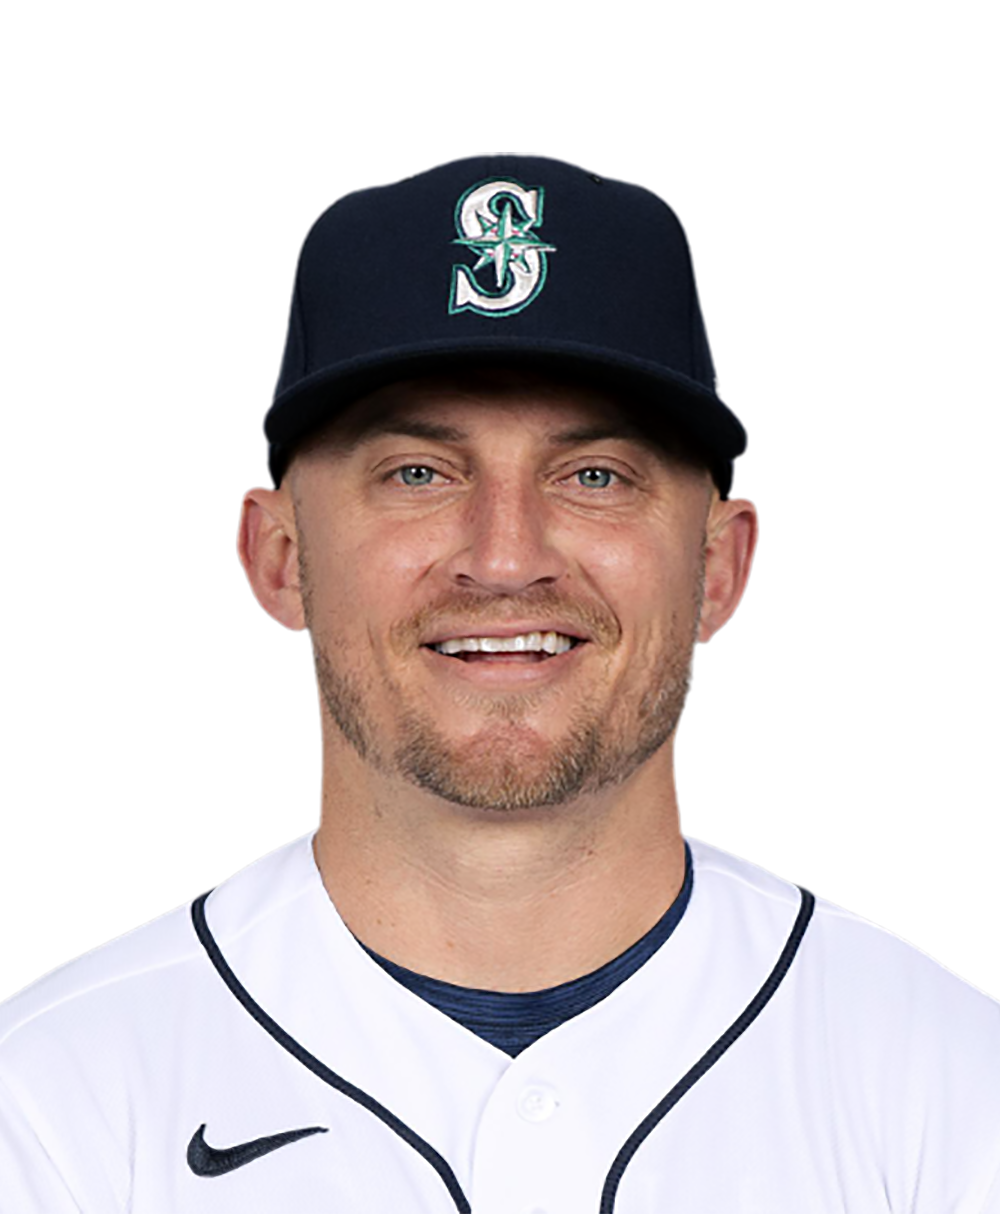 Mariners third baseman Kyle Seager given standing ovation in